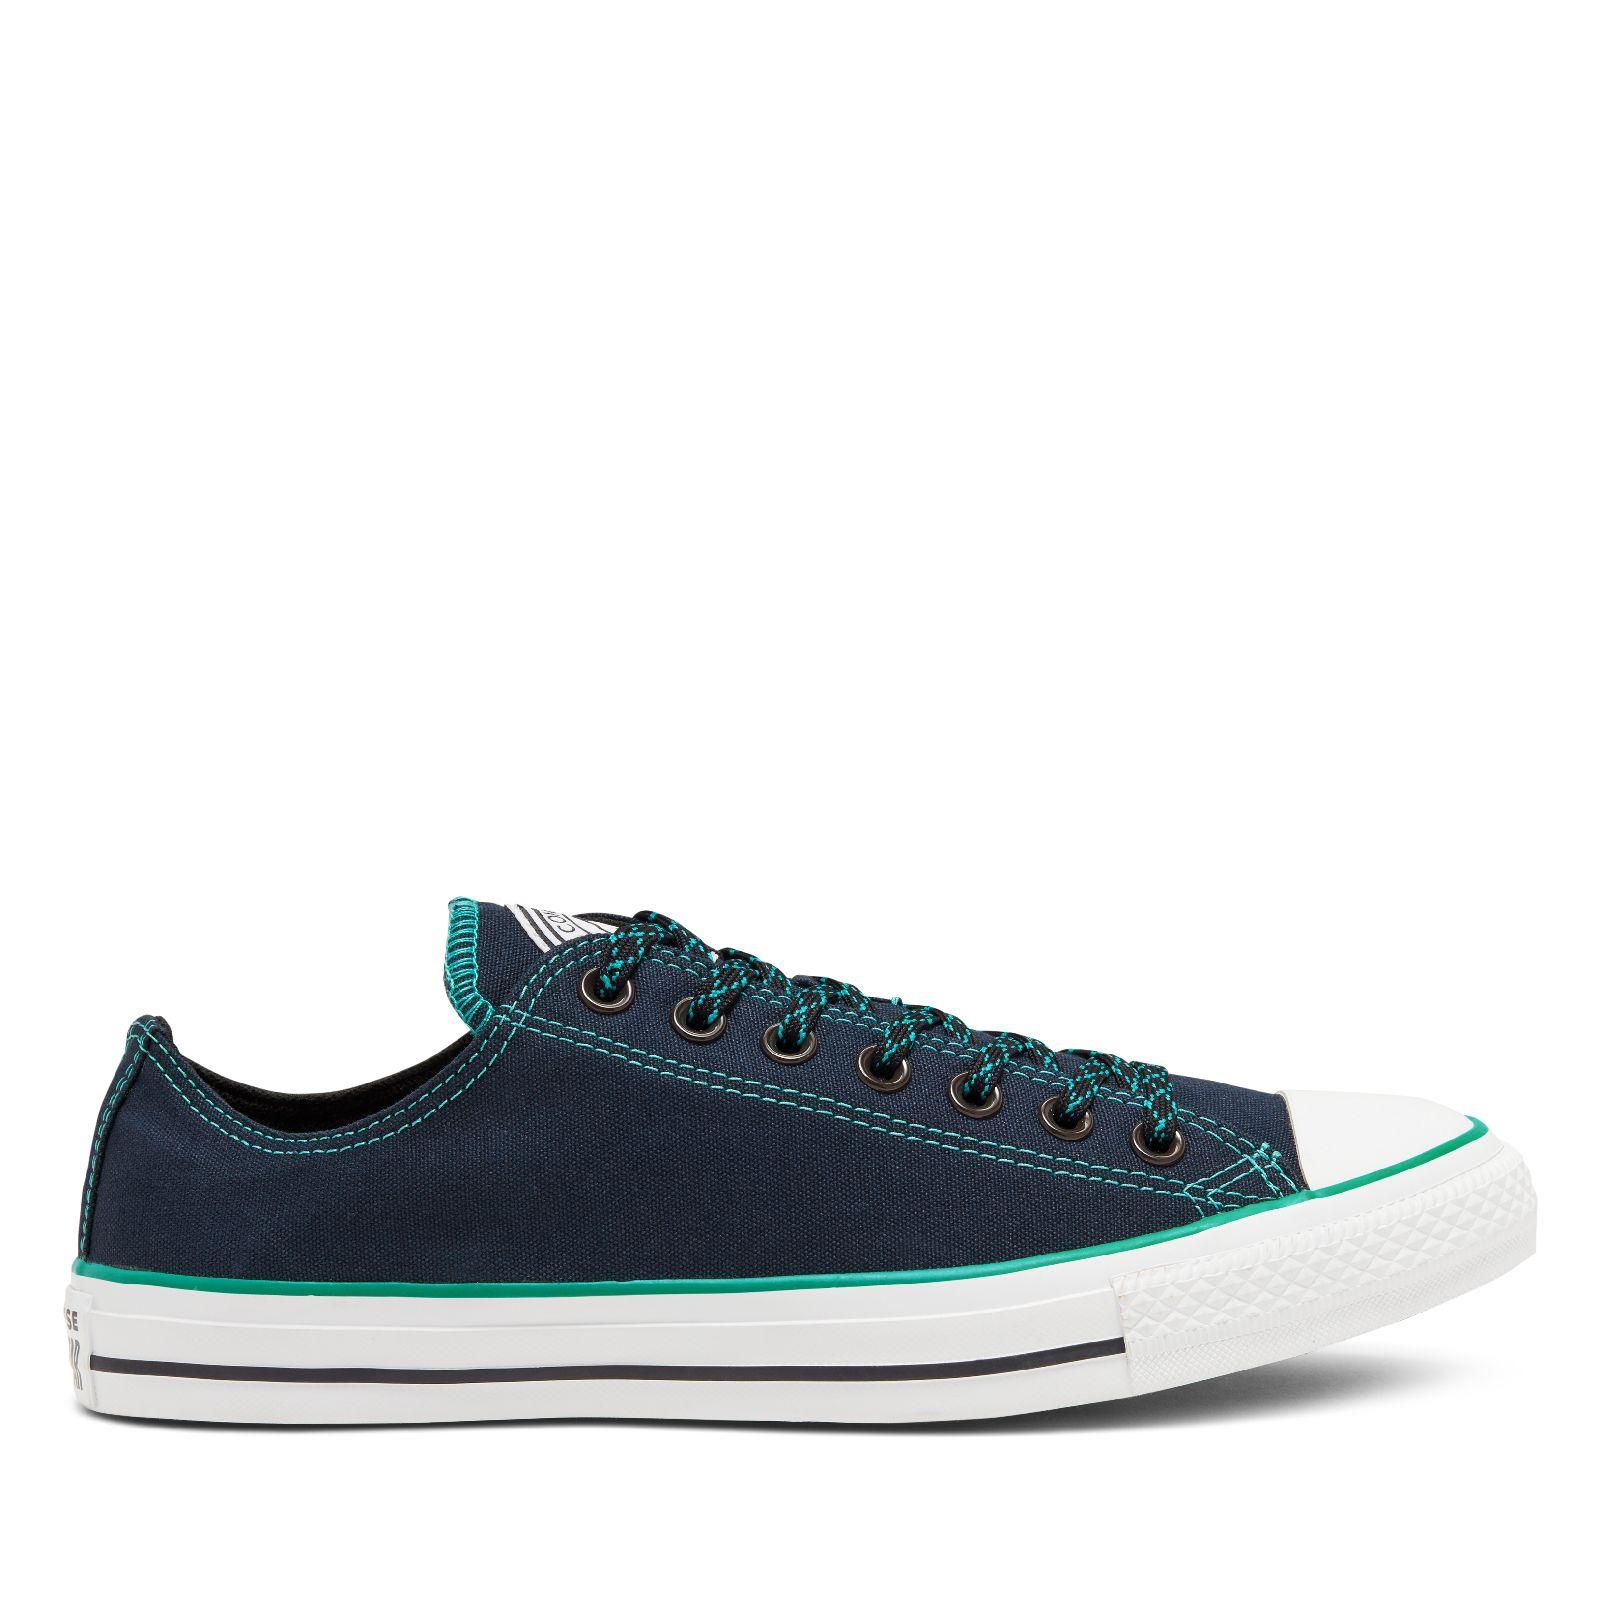 converse chuck taylor all star low top sneakers